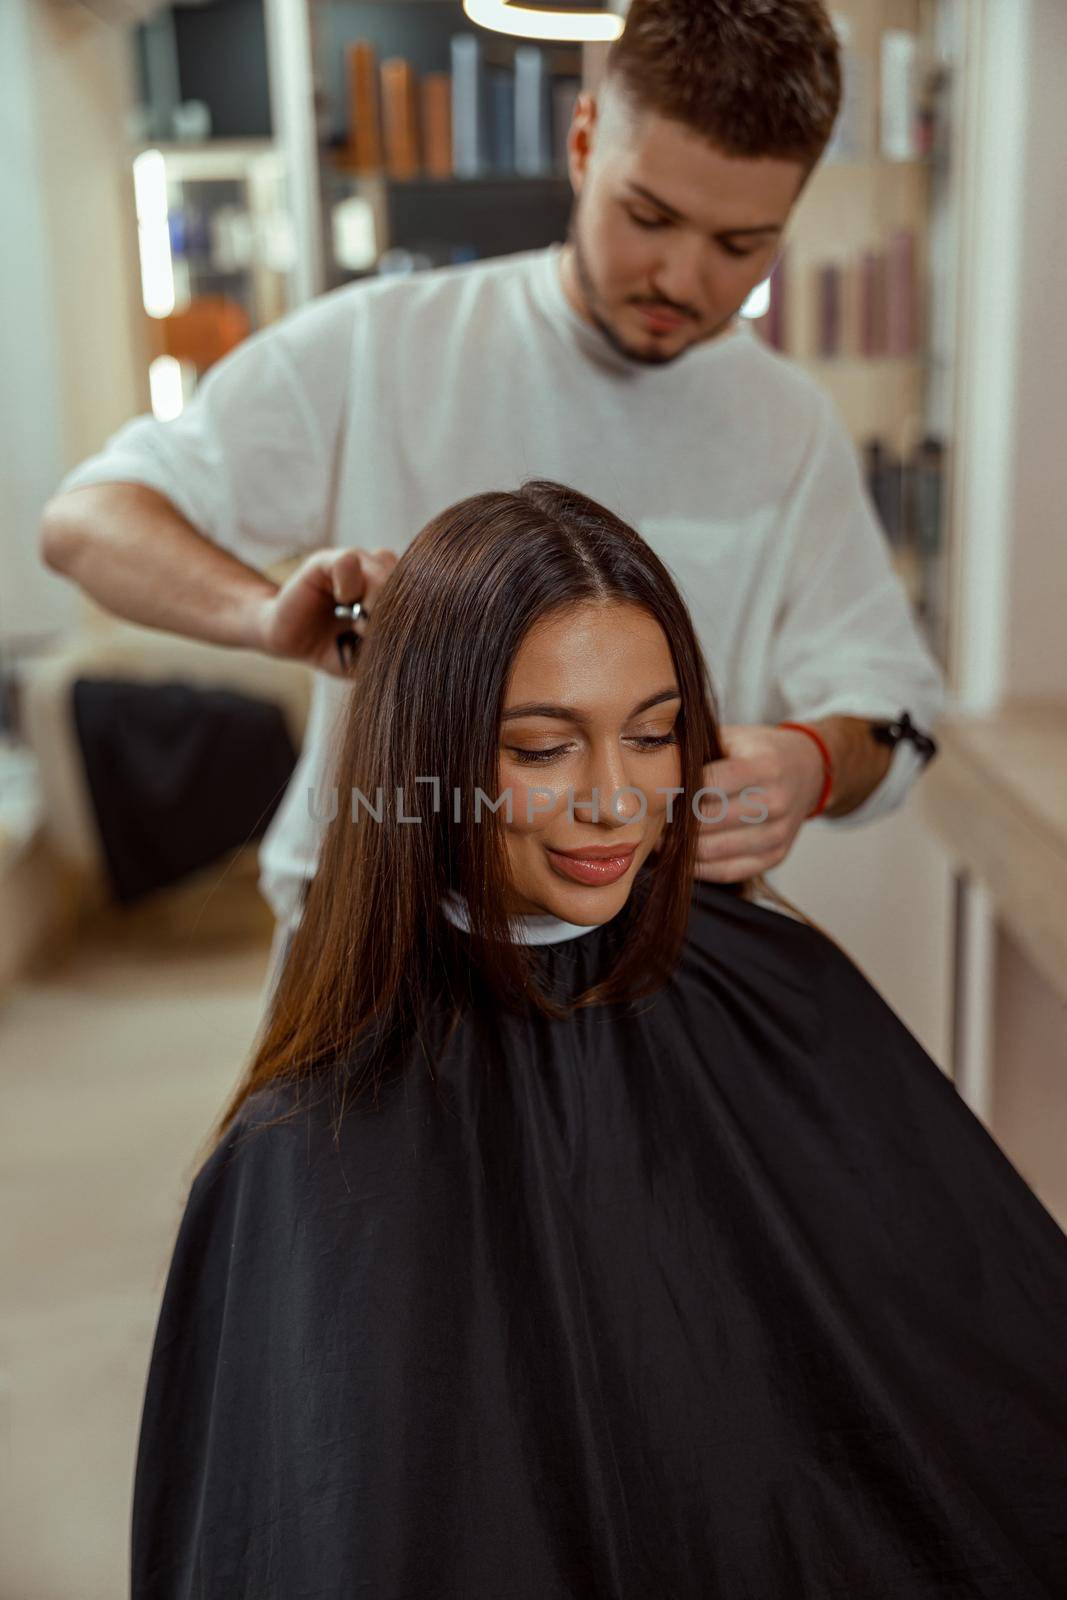 A young woman sits in a chair covered with a cape while a hairstylist cuts her hair